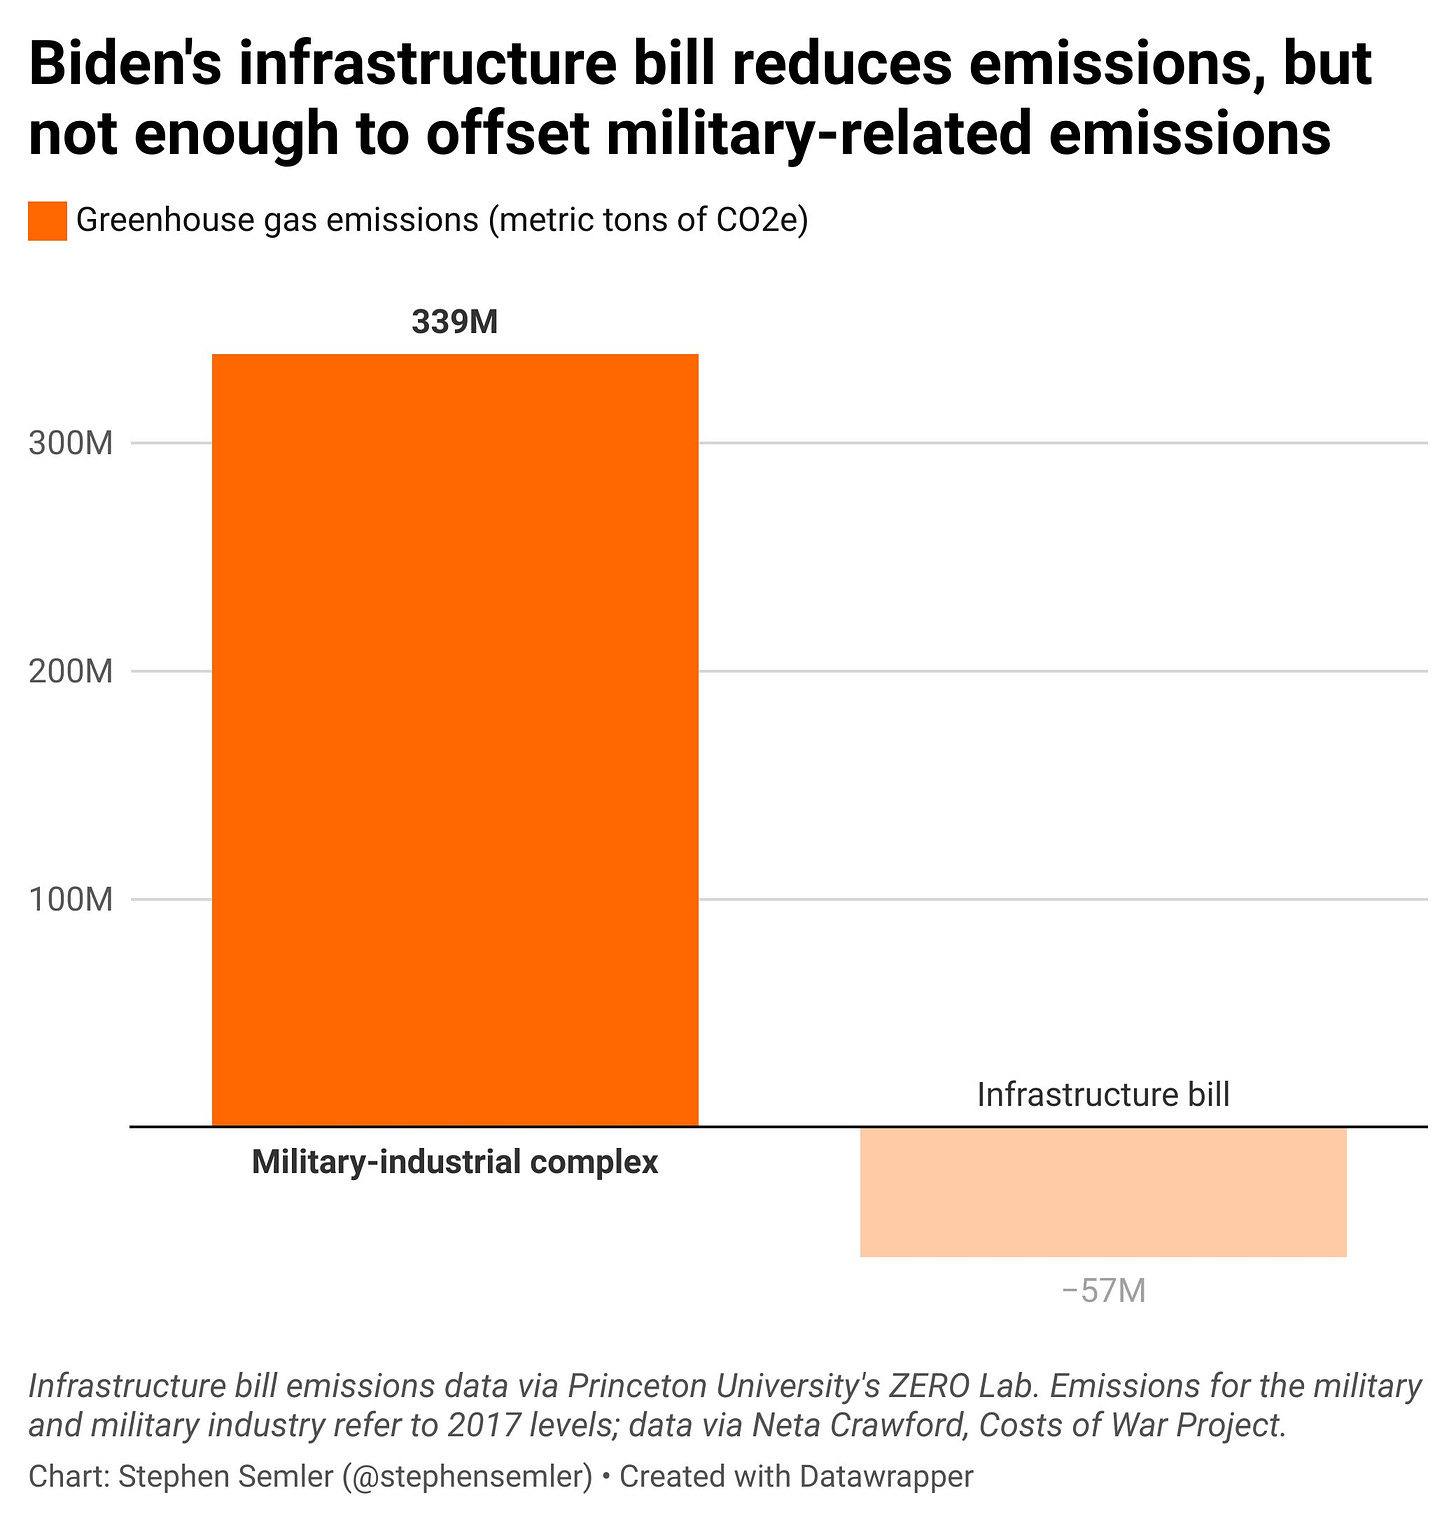 Biden’s infrastructure bill reduces emissions, but not enough to offset military-related emissions. The chart shows greenhouse gas emissions measured in metric tons of CO2e. The military-industrial complex produces 339 million metric tons of CO2e annually; Biden’s infrastructure bill will eventually reduce emissions by only 57 million metric tons annually. Infrastructure bill emissions data via Princeton University’s Zero Lab. Emissions for military and military industrial refer to 2017 levels; data via Neta Crawford, Costs of War Project. Chart and analysis by me, Stephen Semler.